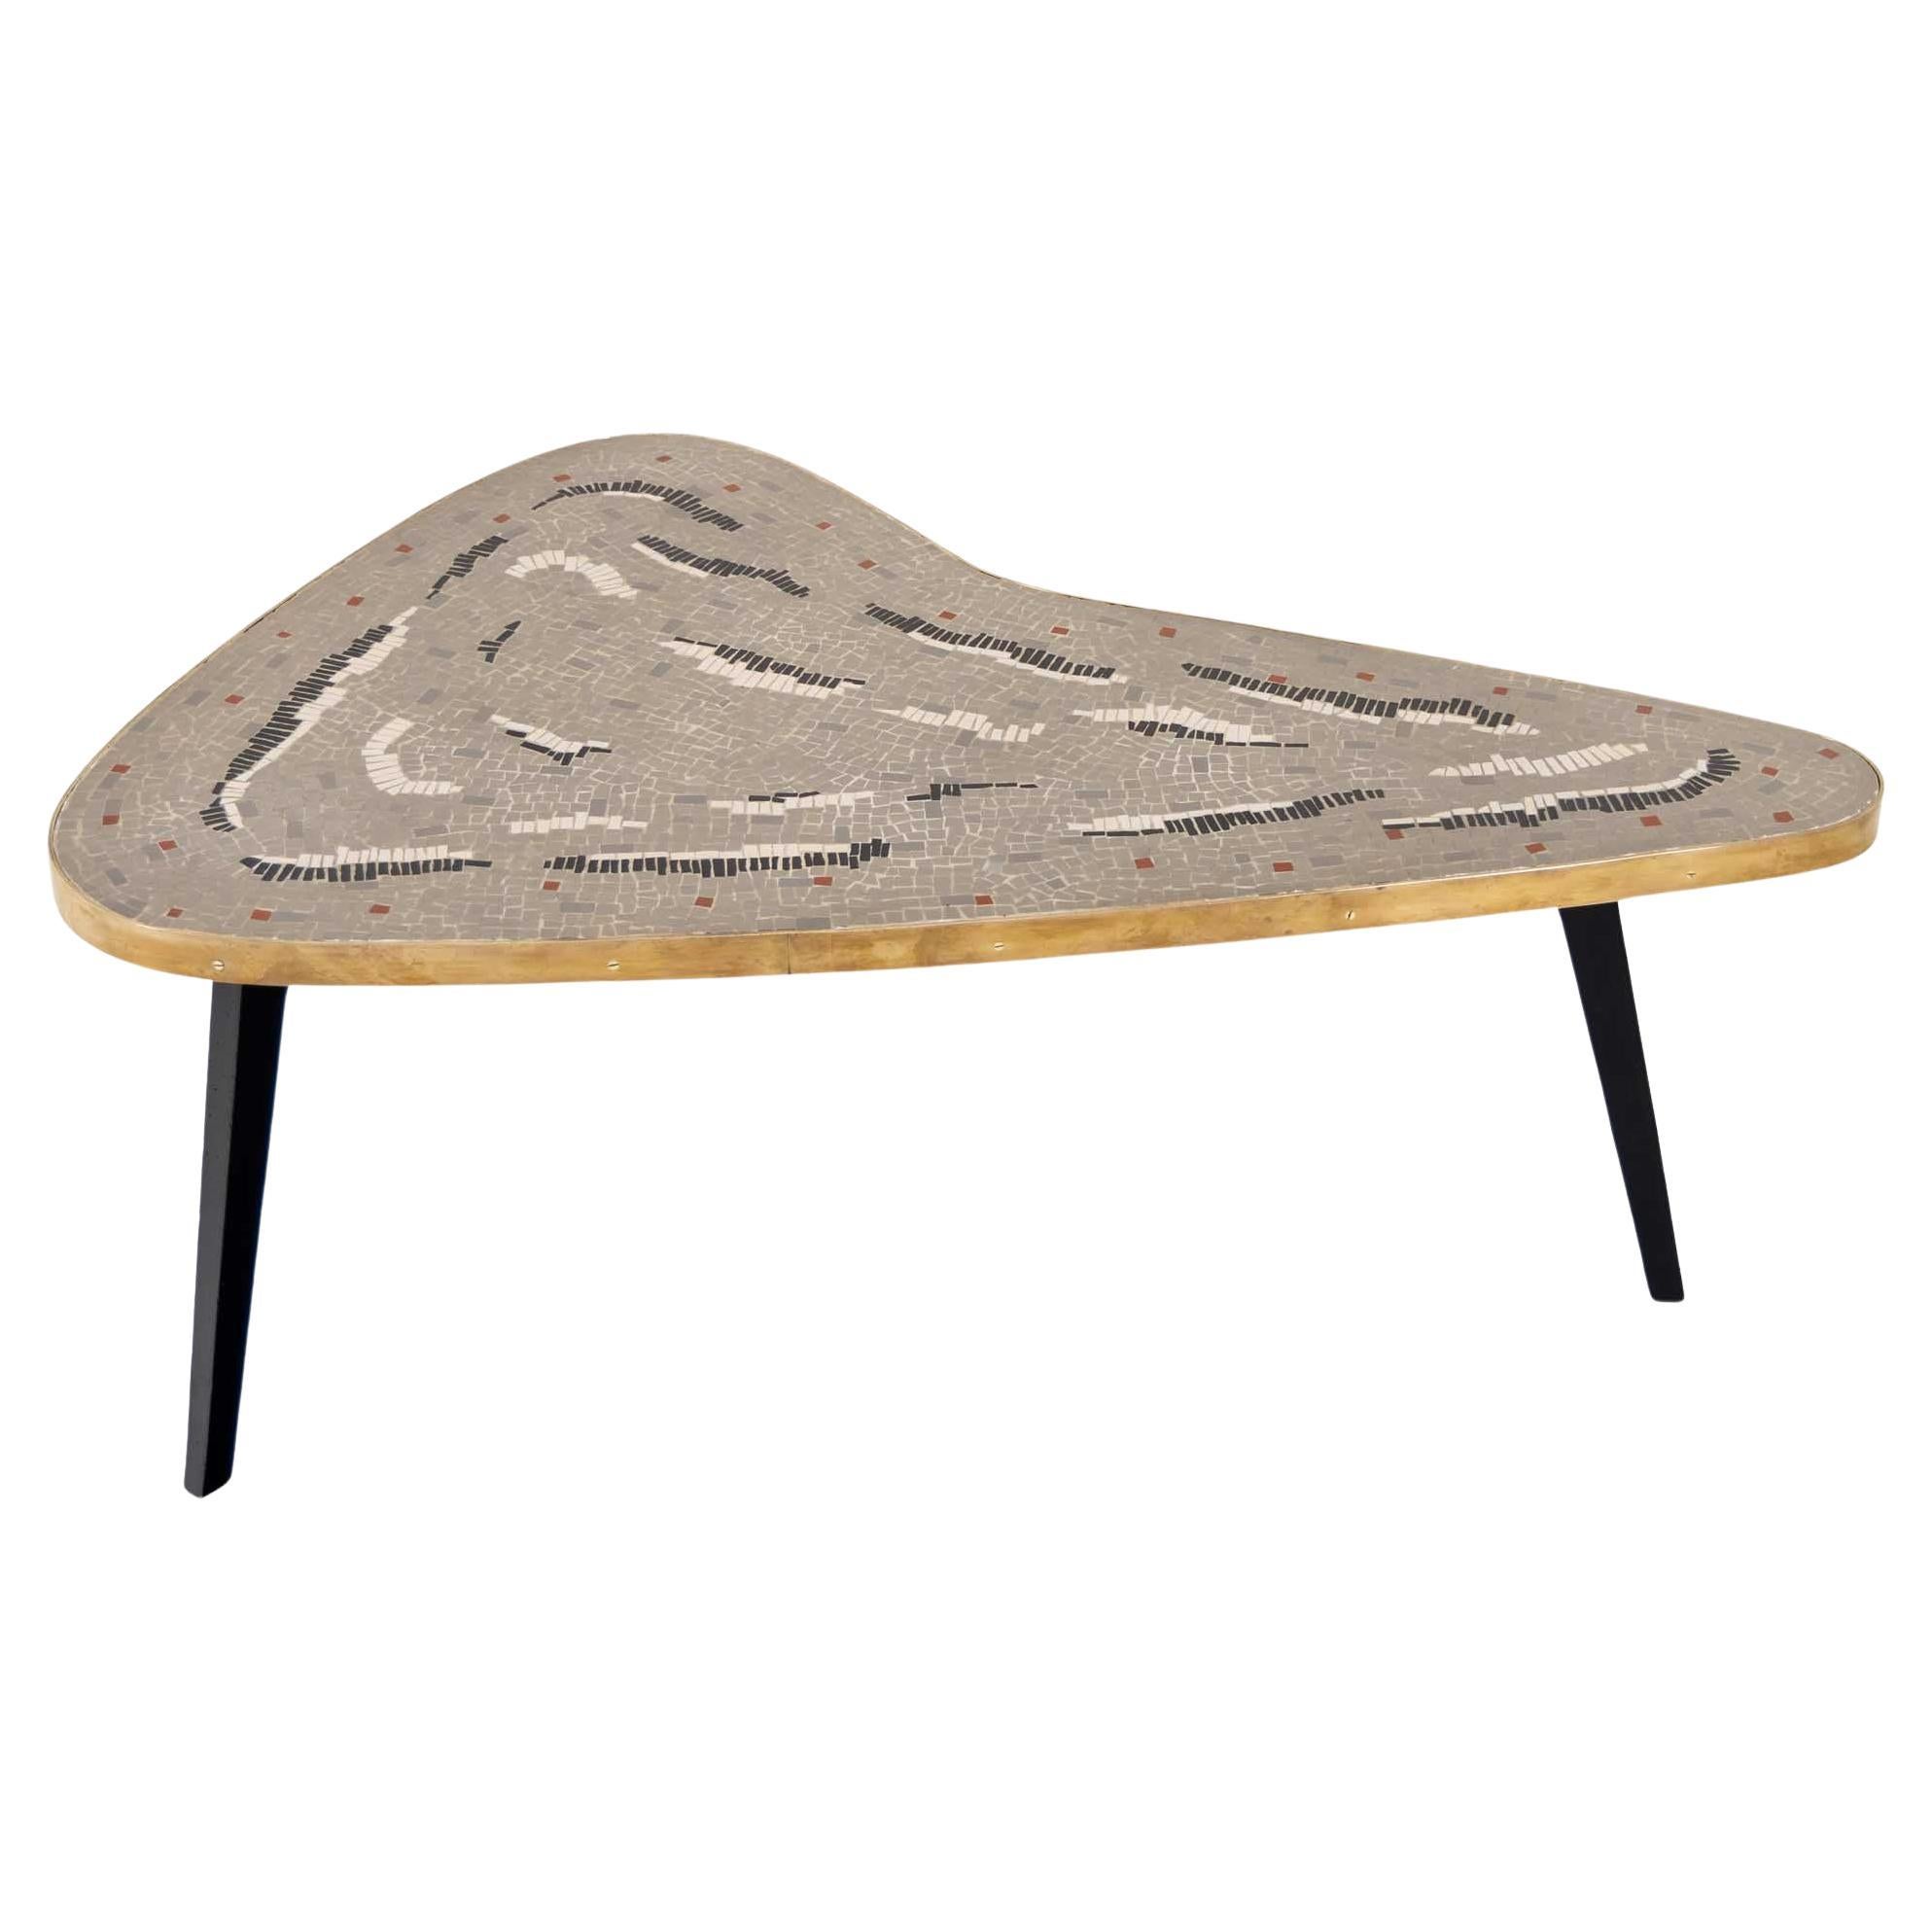 Mosaic Boomerang Coffee Table, 1960s For Sale